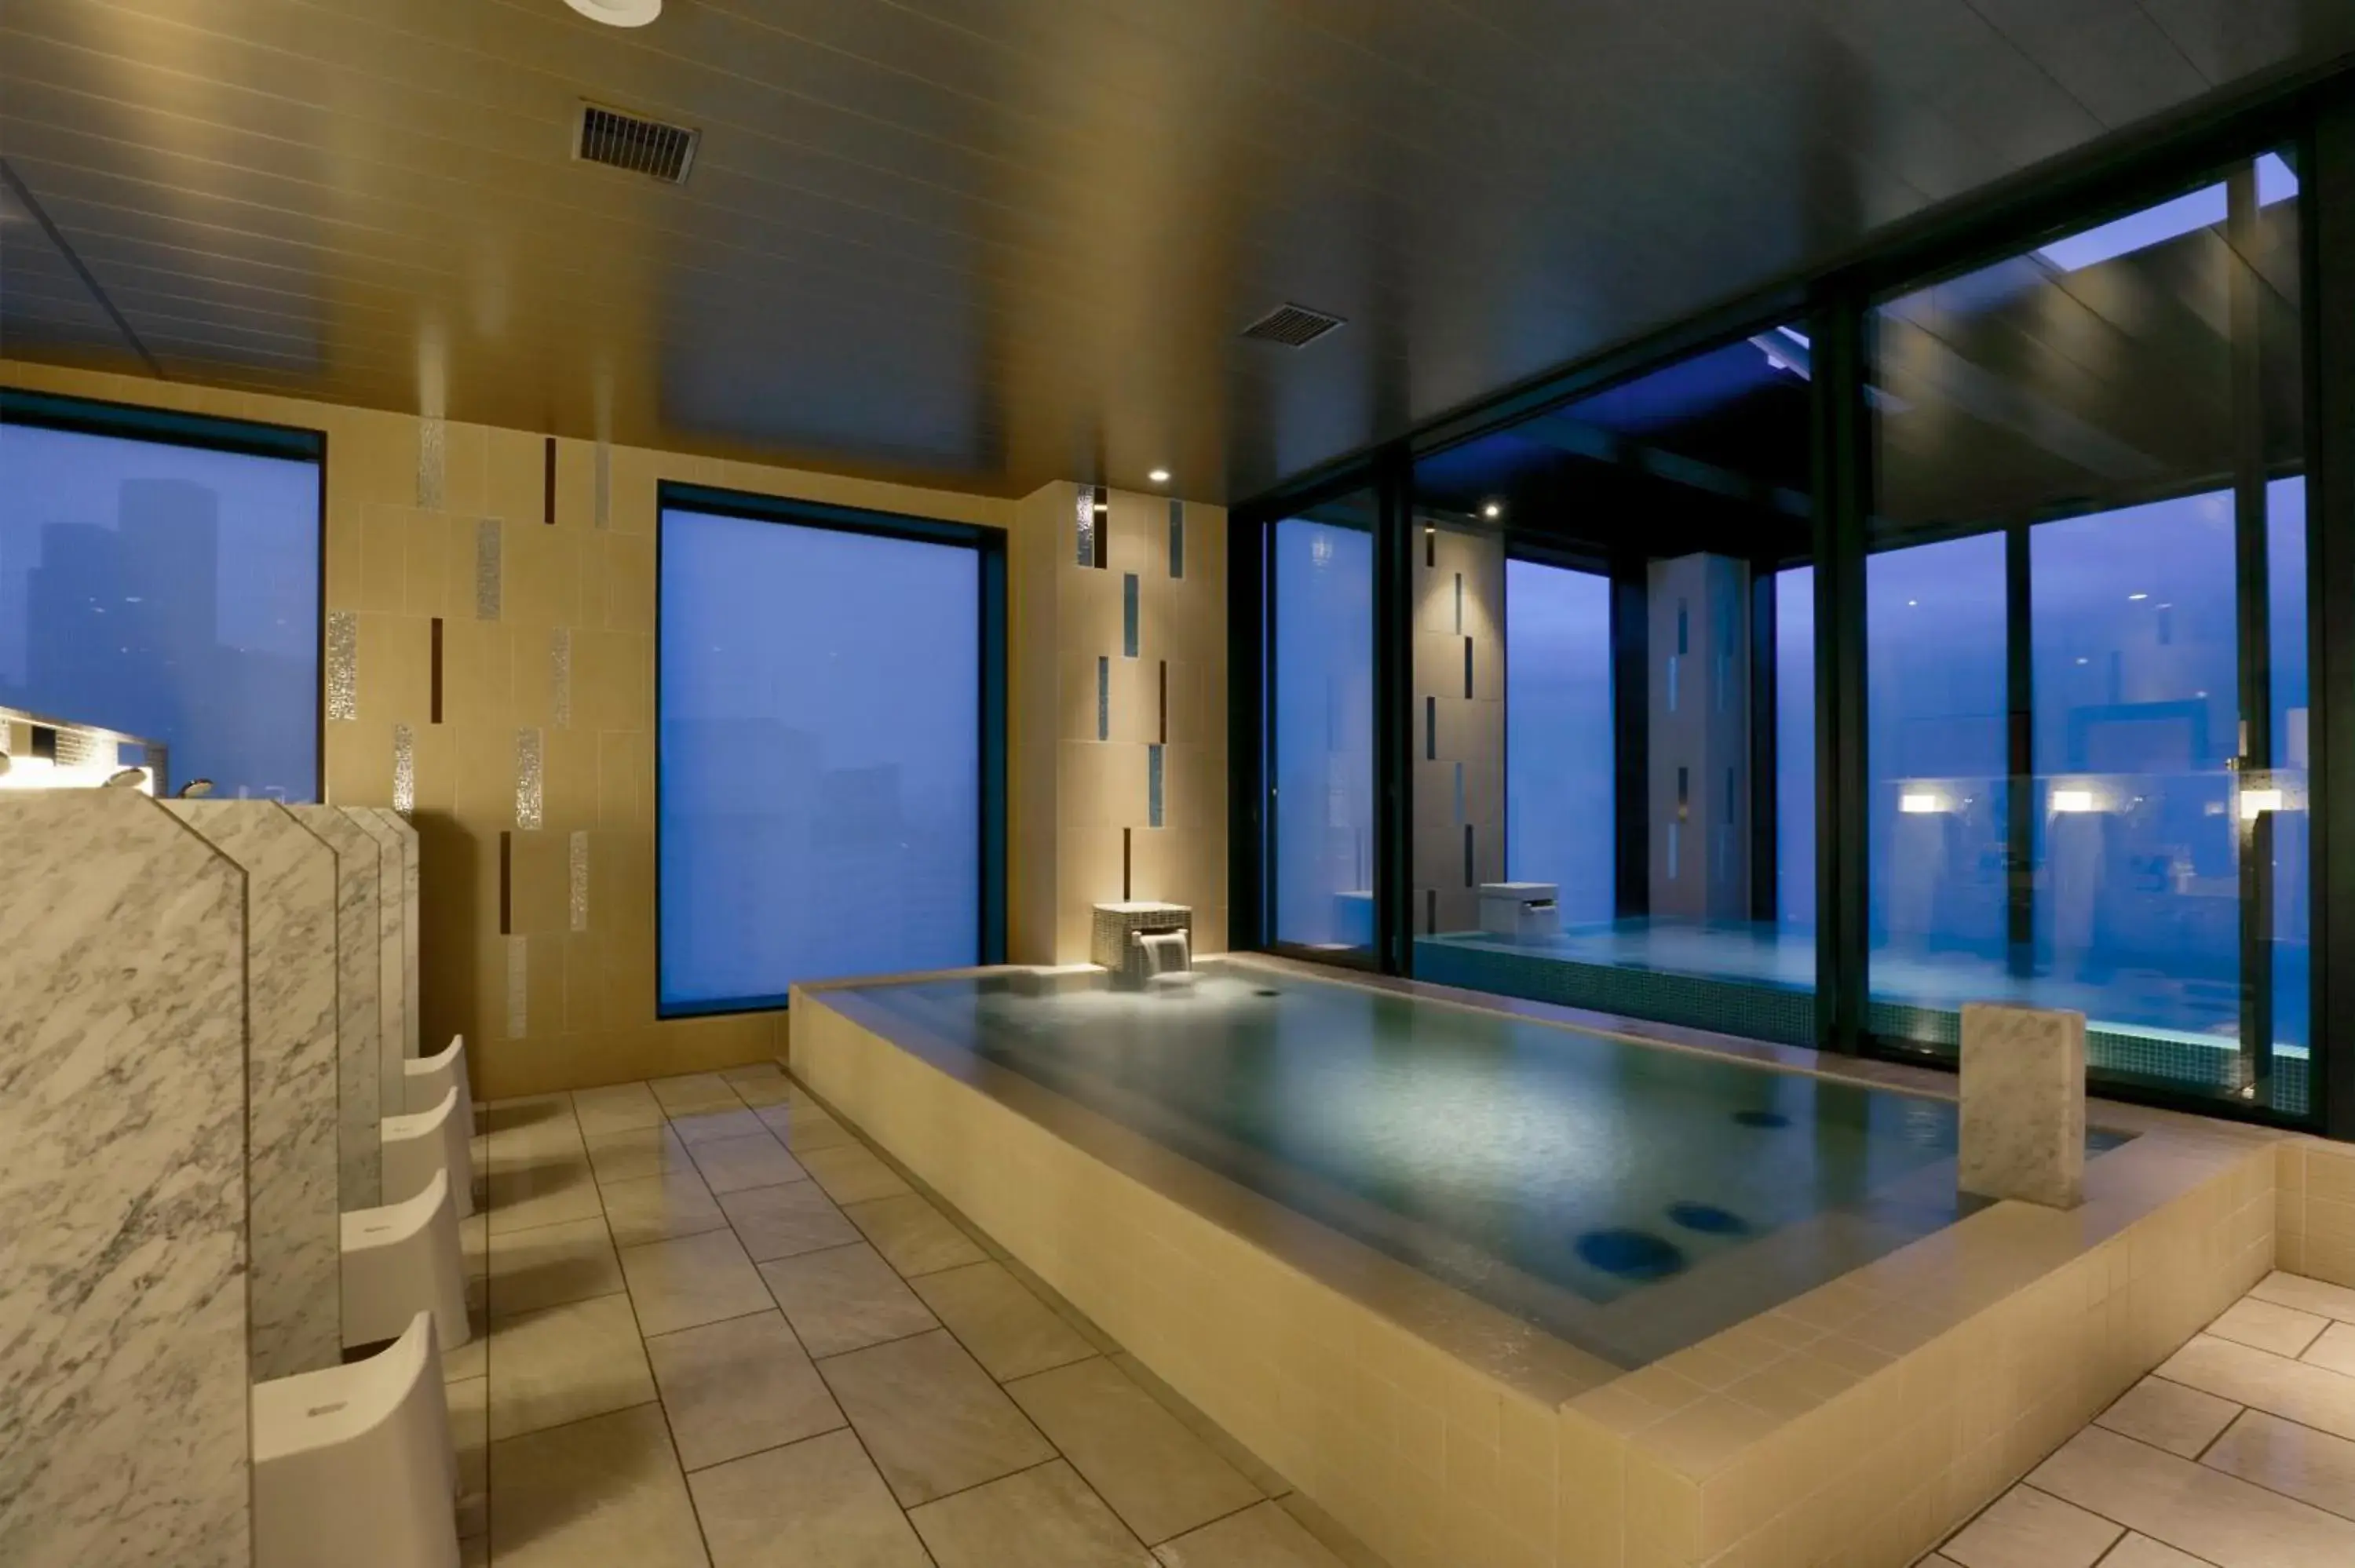 Open Air Bath, Swimming Pool in Candeo Hotels Tokyo Roppongi